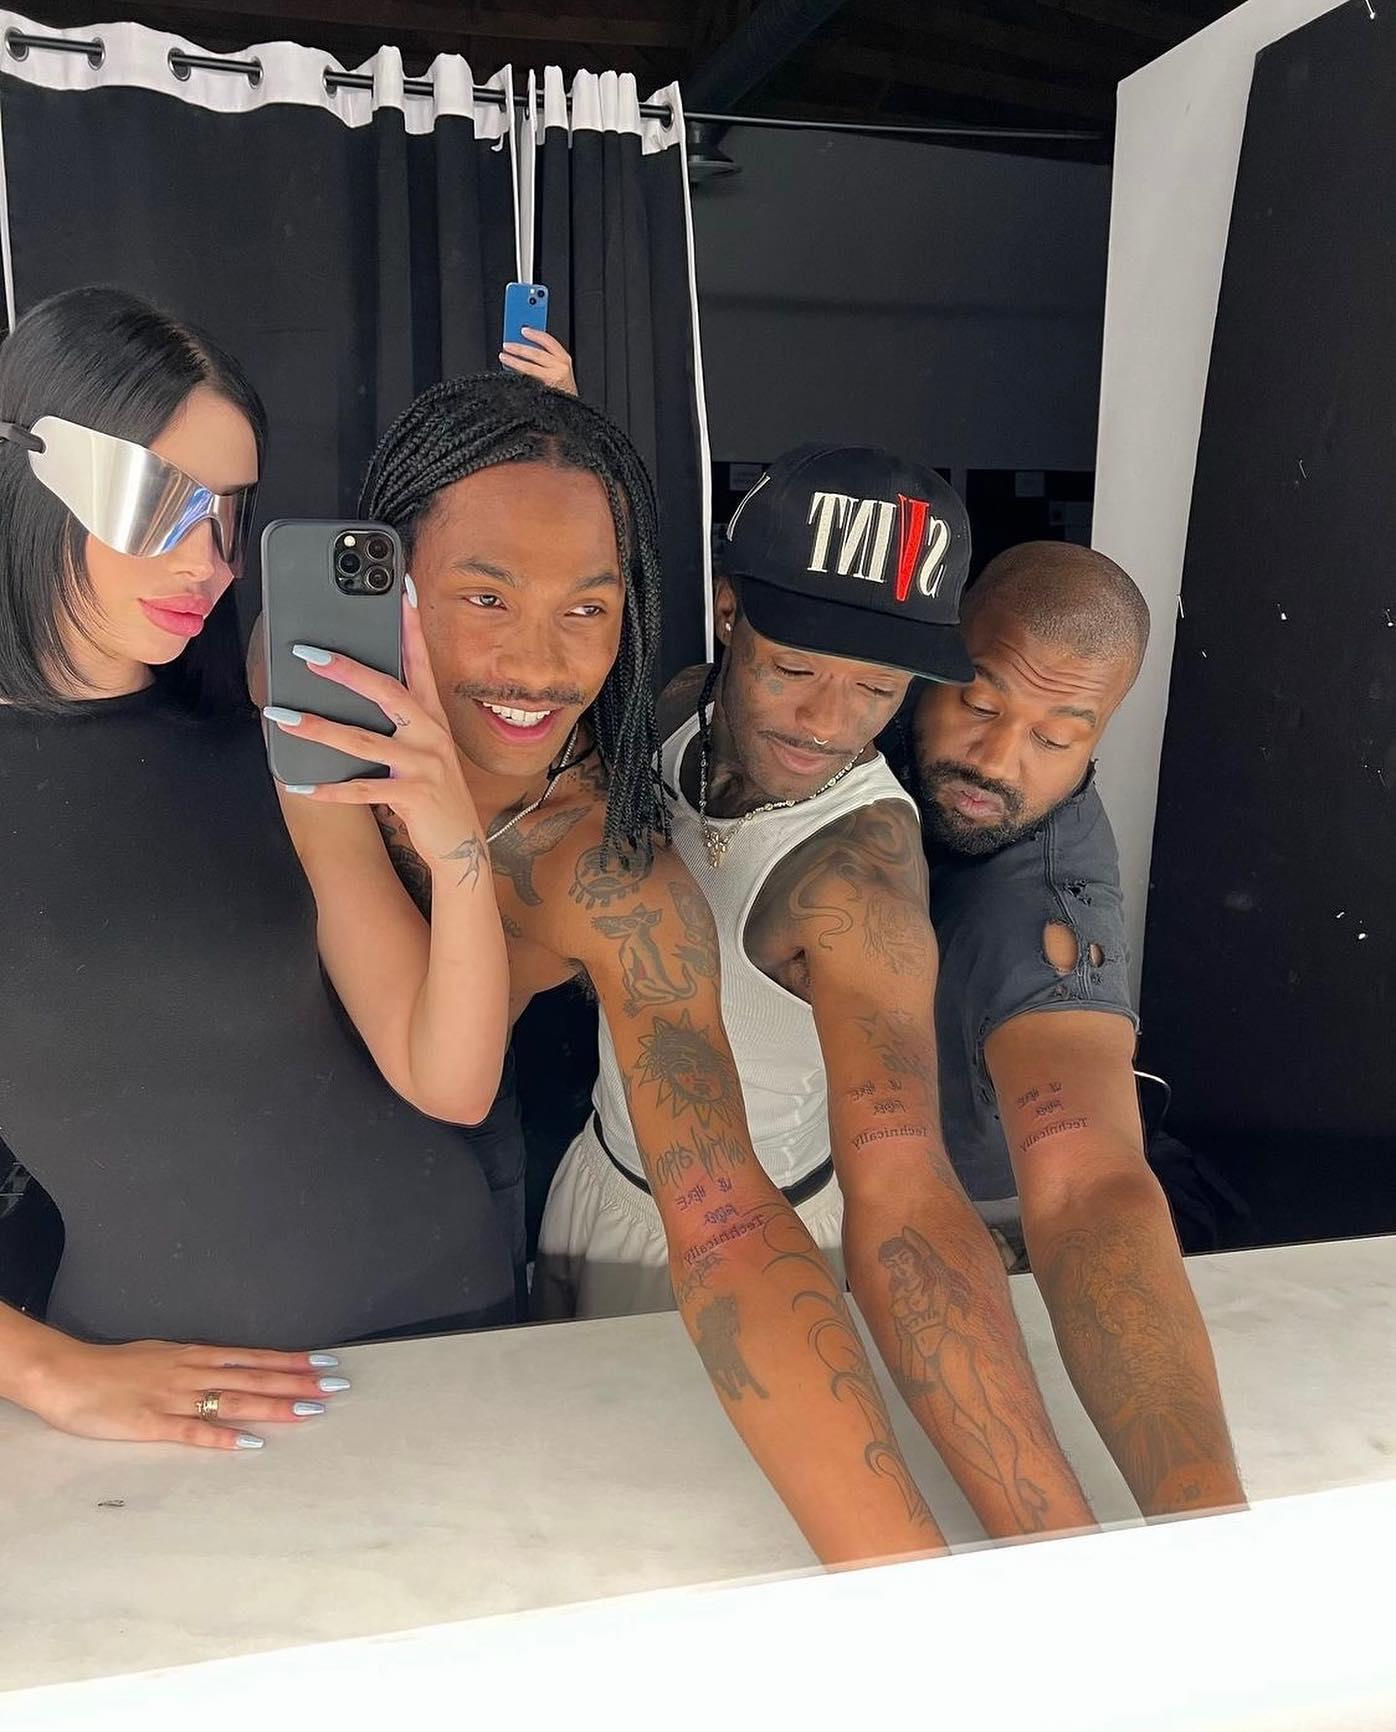 Kanye West, Lil Uzi Vert and Steve Lacy debuted matching tattoos